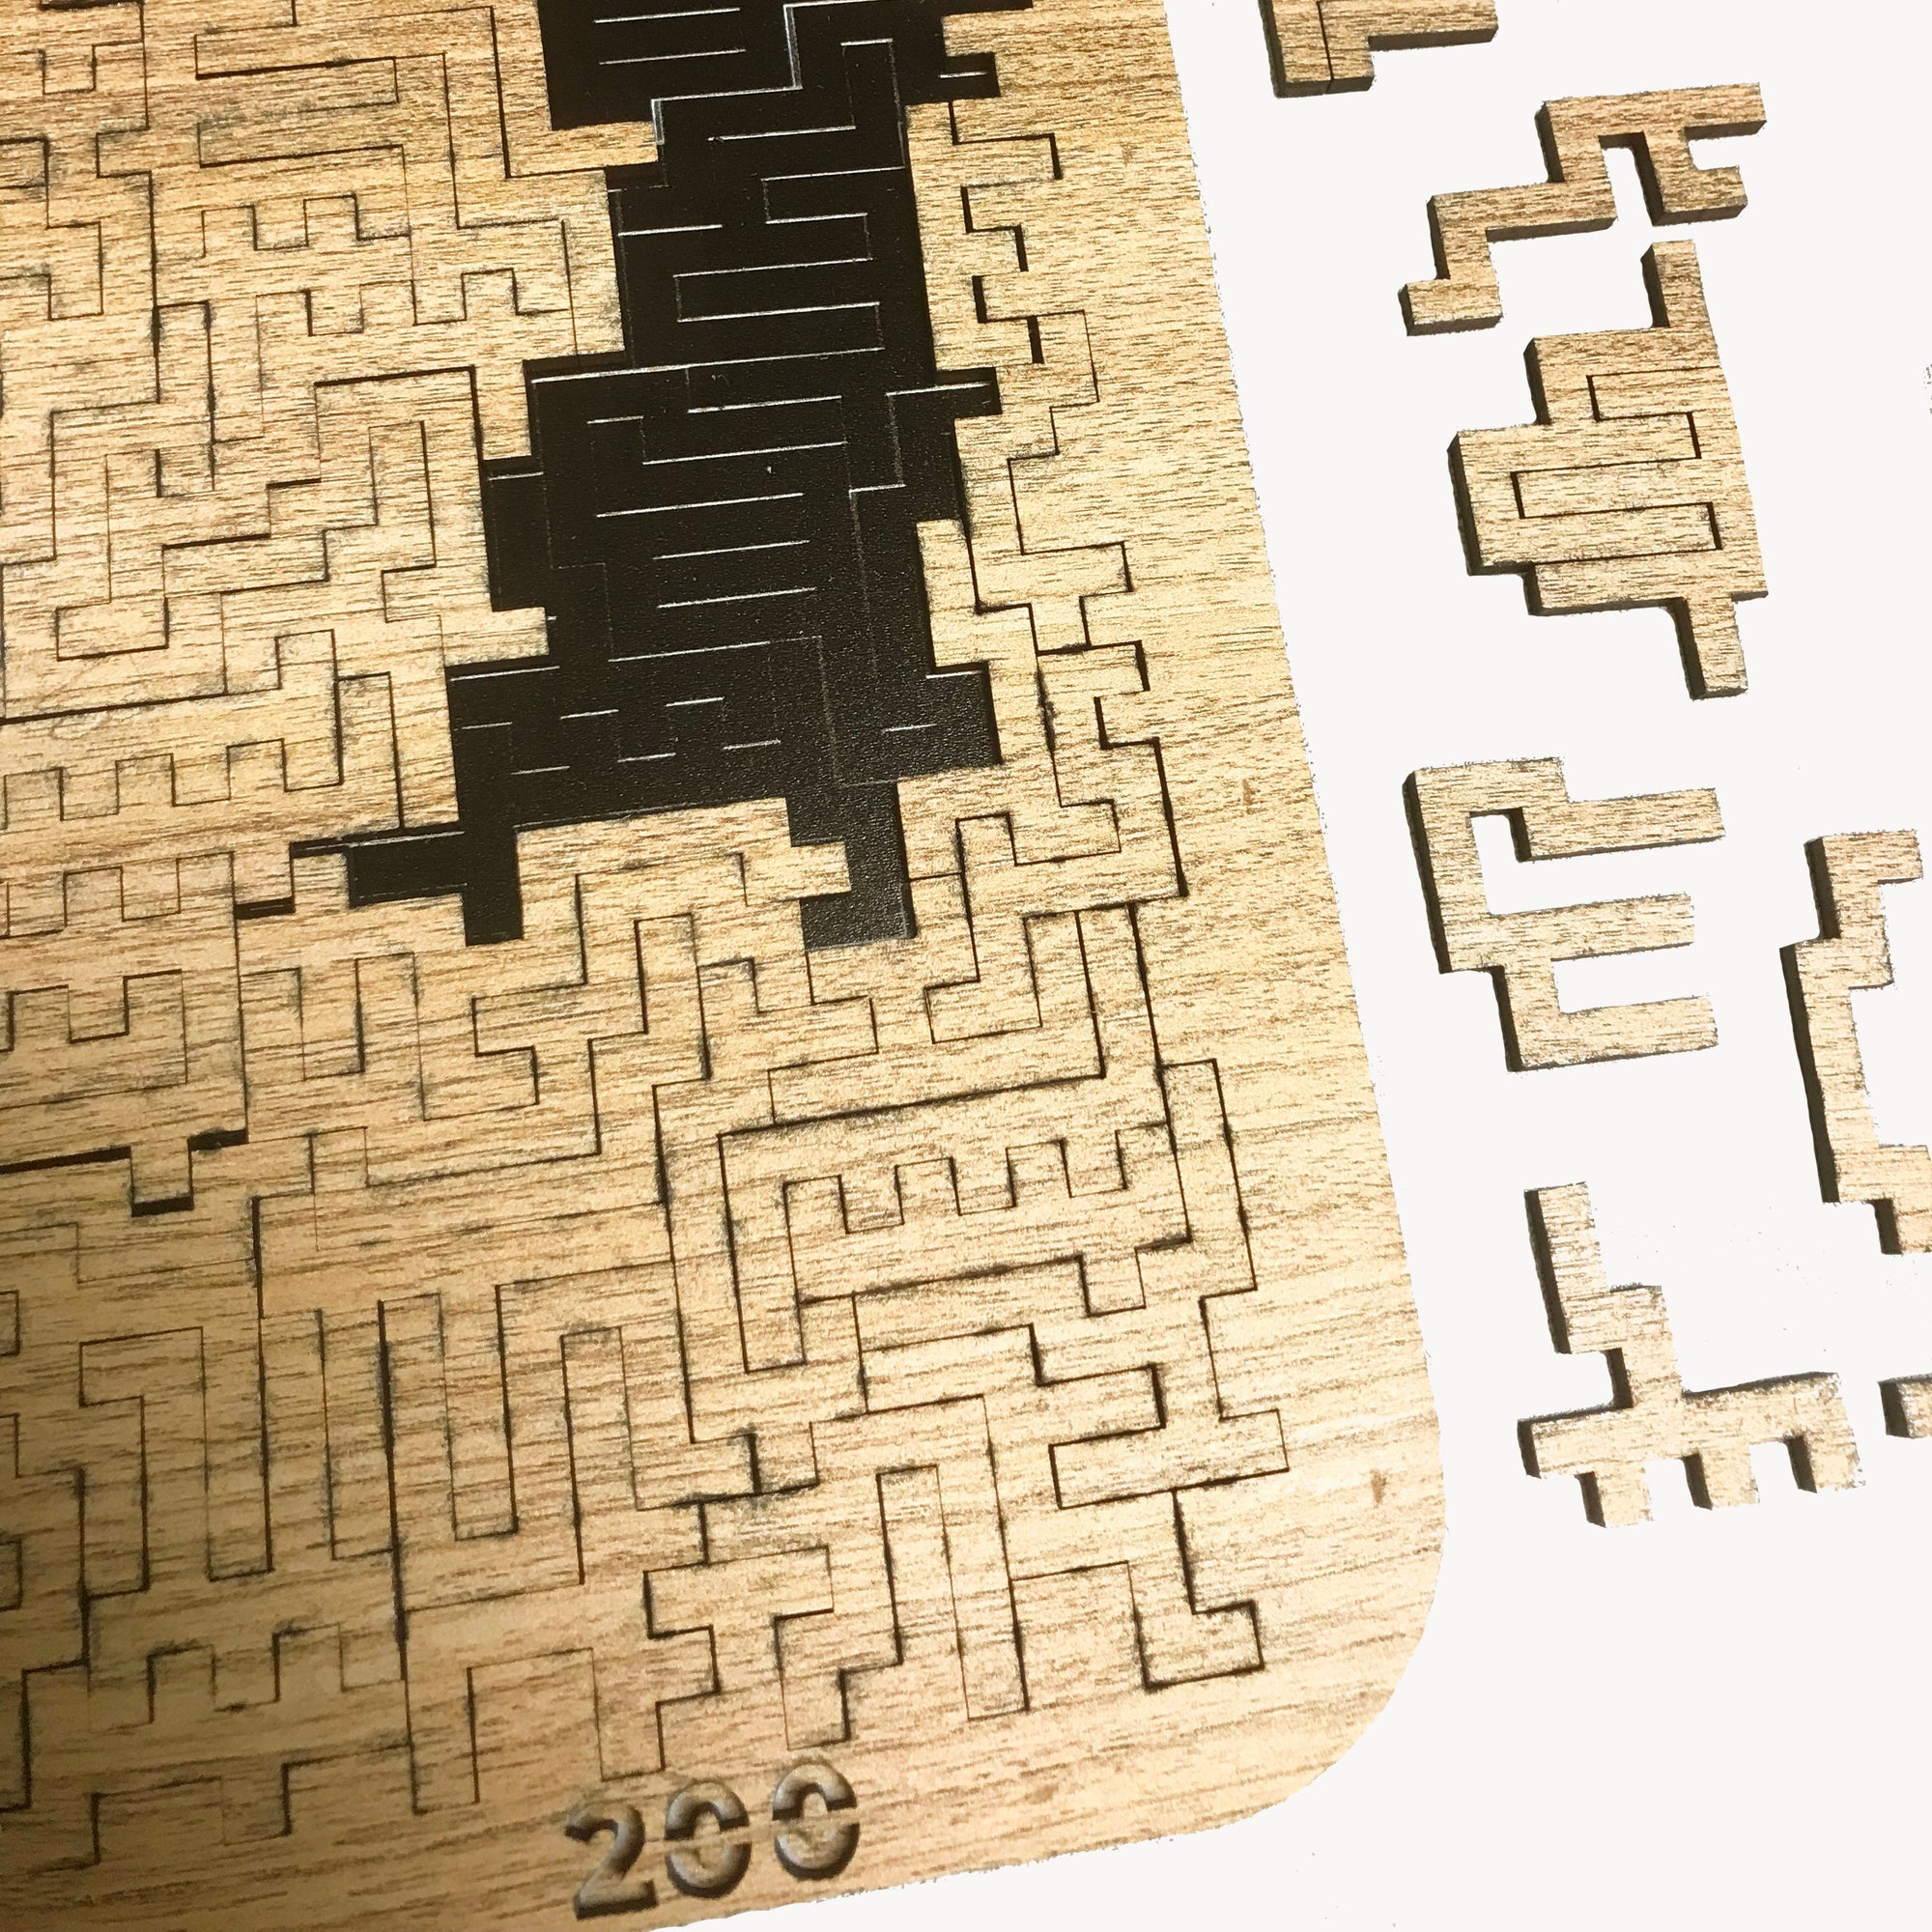 Torched Products Puzzle Oops! Aztec Labyrinth Puzzle (200 PC) Imperfect/Misprint Sale!